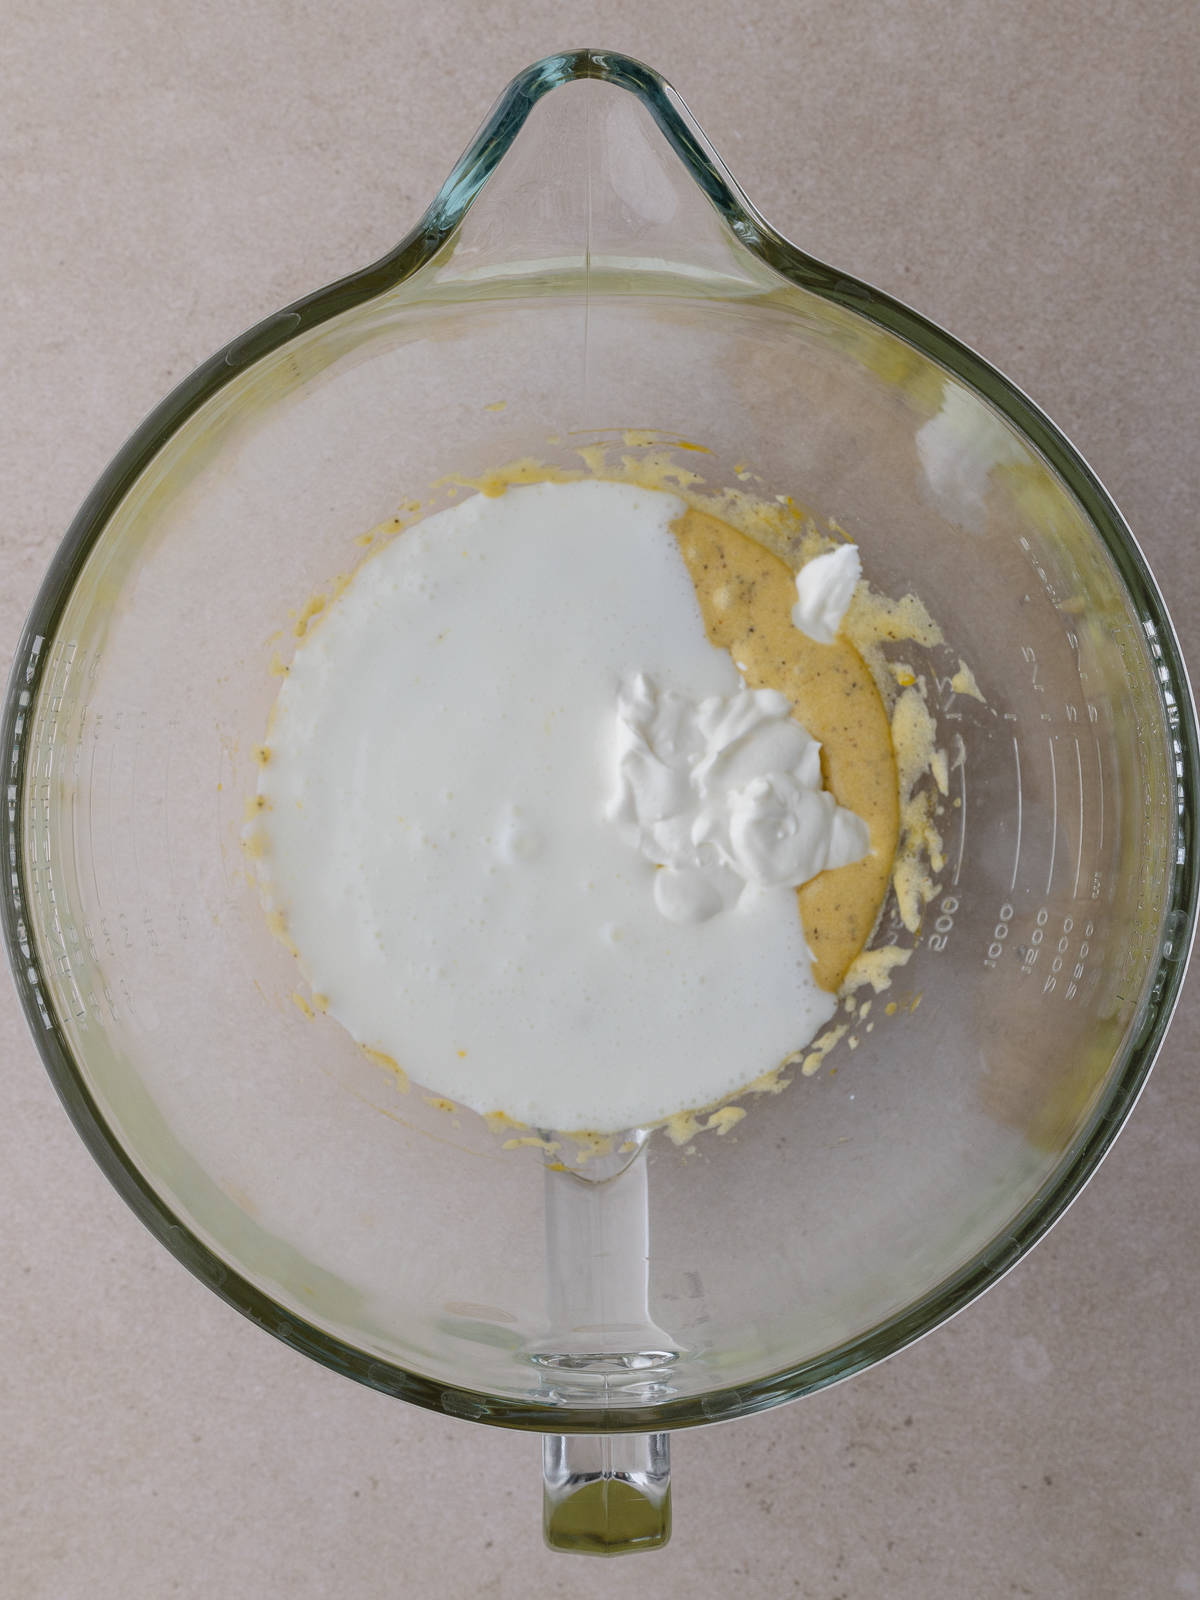 Buttermilk and sour cream are added to the egg/sugar/ butter mixture.